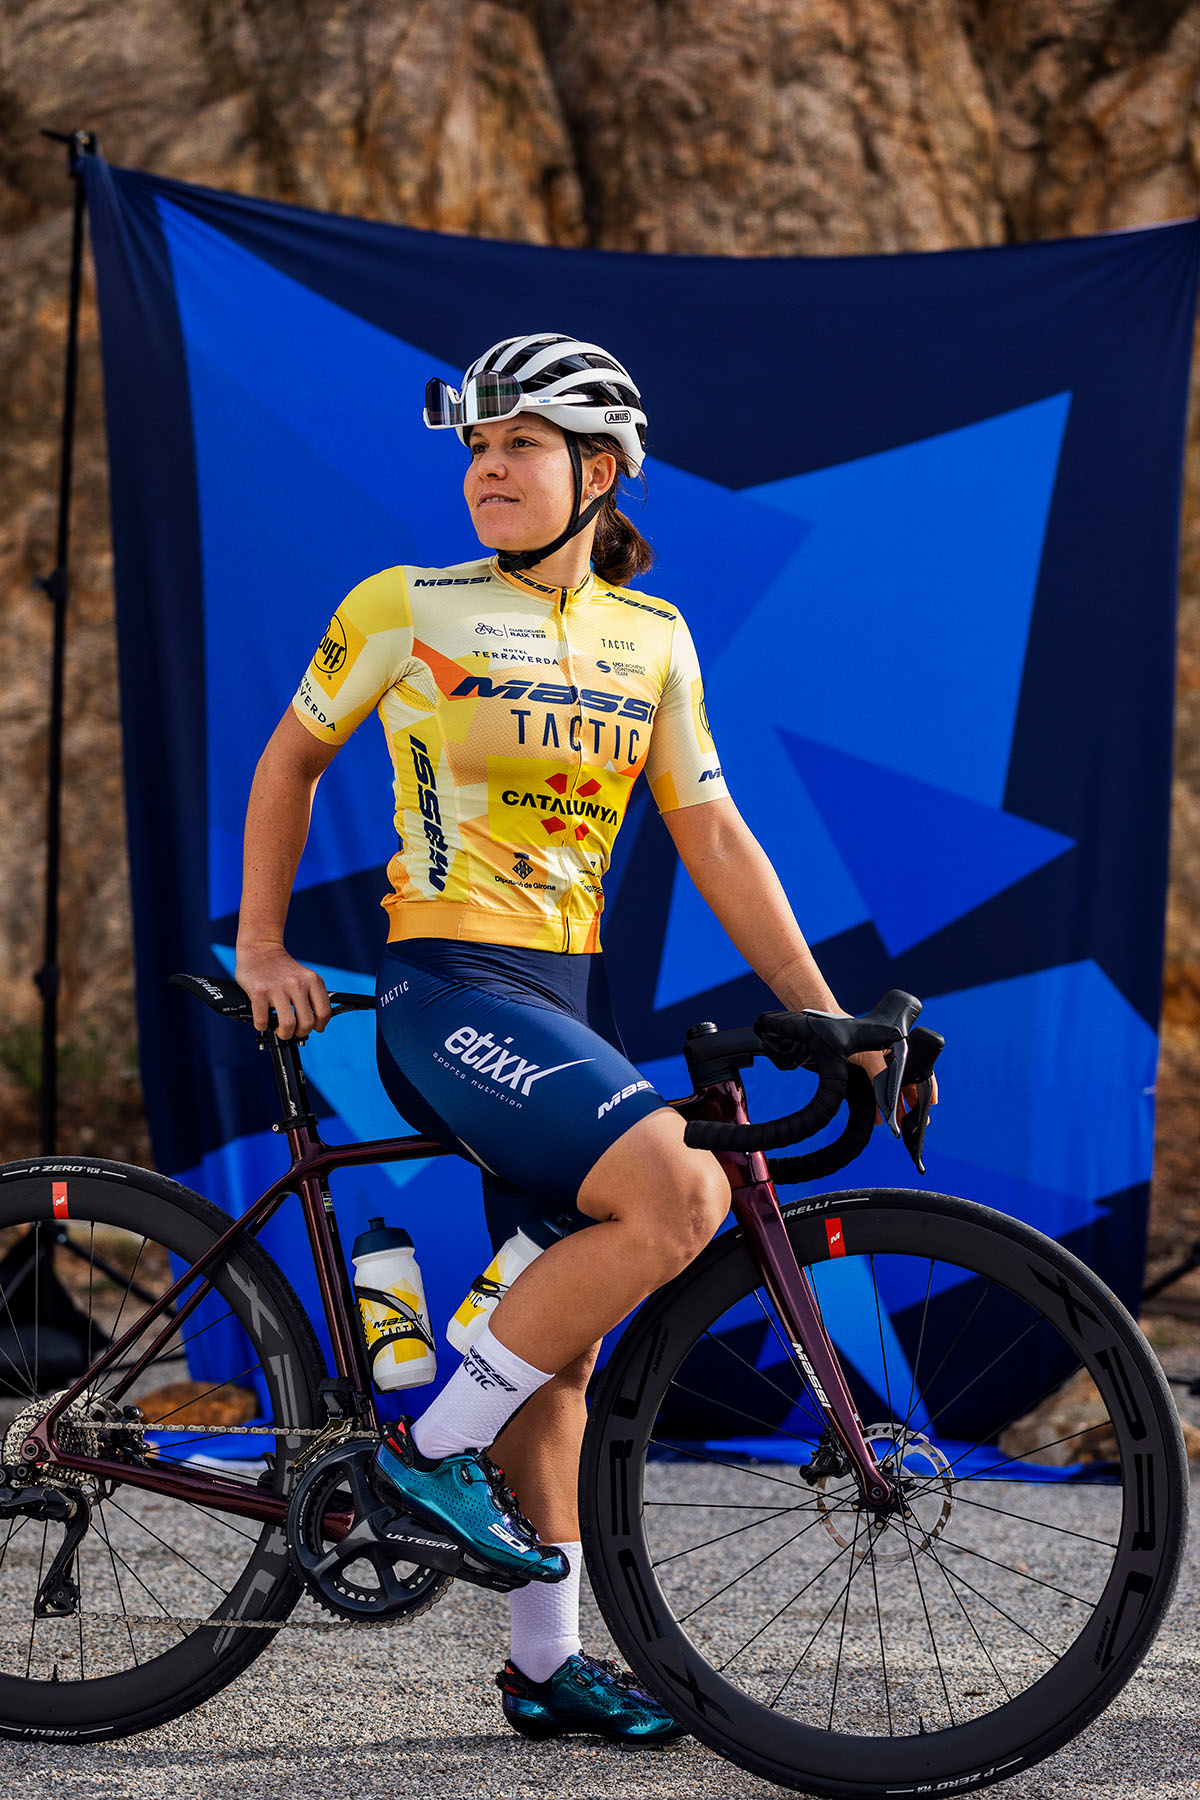 The new 2023 kit for the Massi-Tactic UCI Women's cycling team